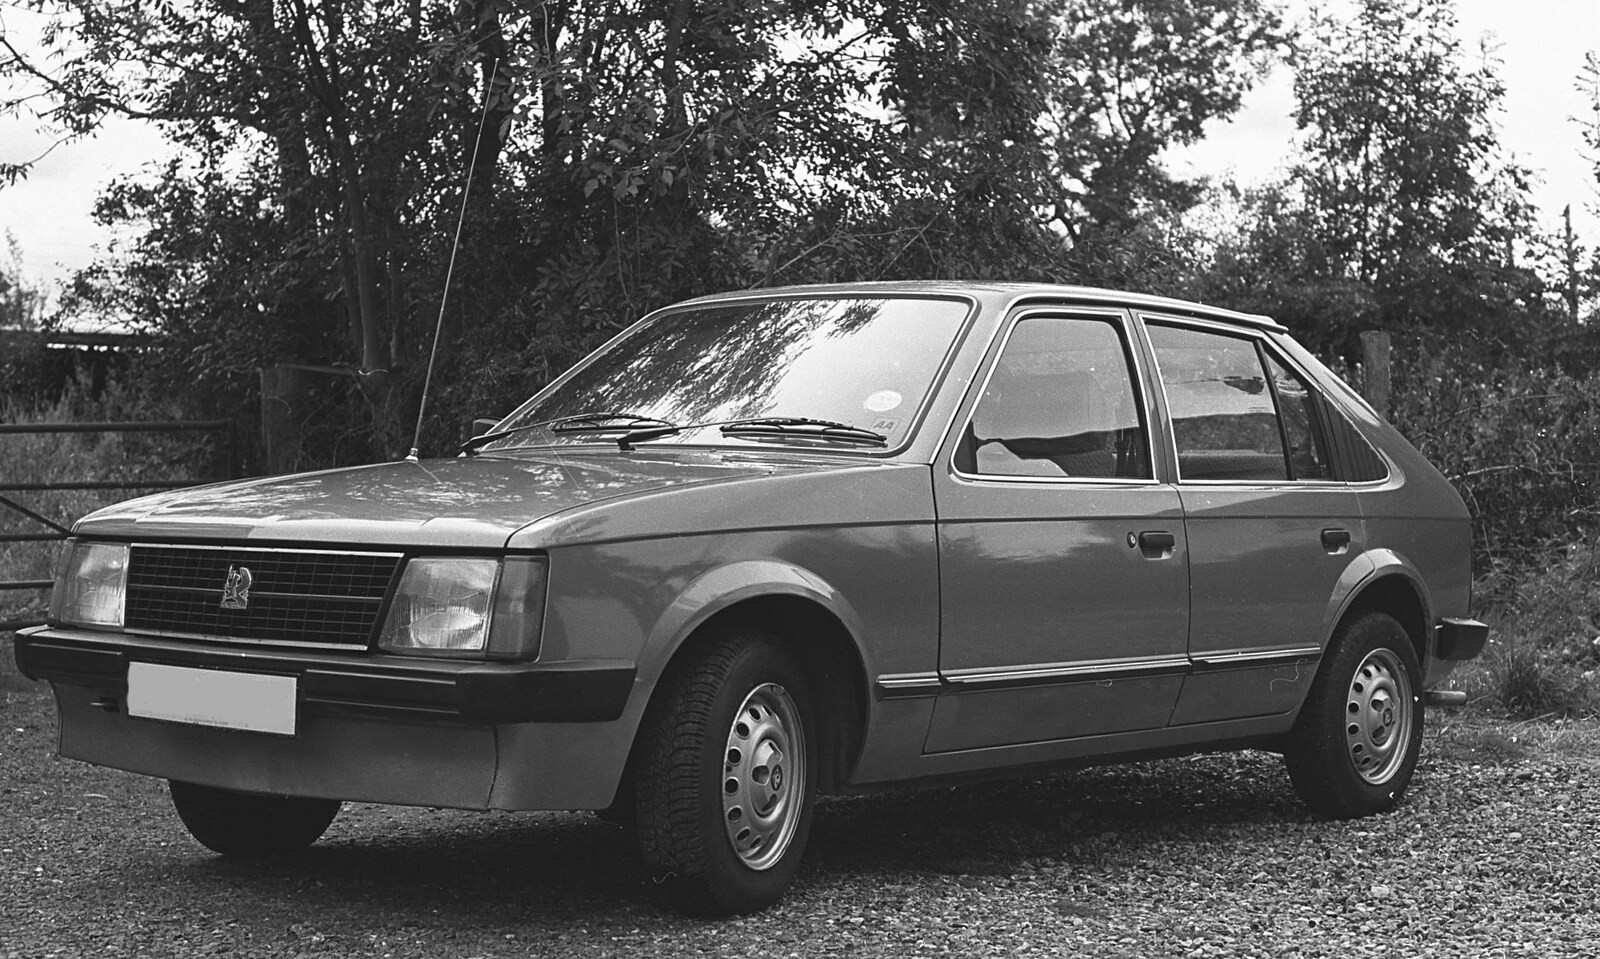 A Black and White Life in Concrete, Stuston, Suffolk - 3rd September 1992: Nosher's beloved Mark 1 Astra